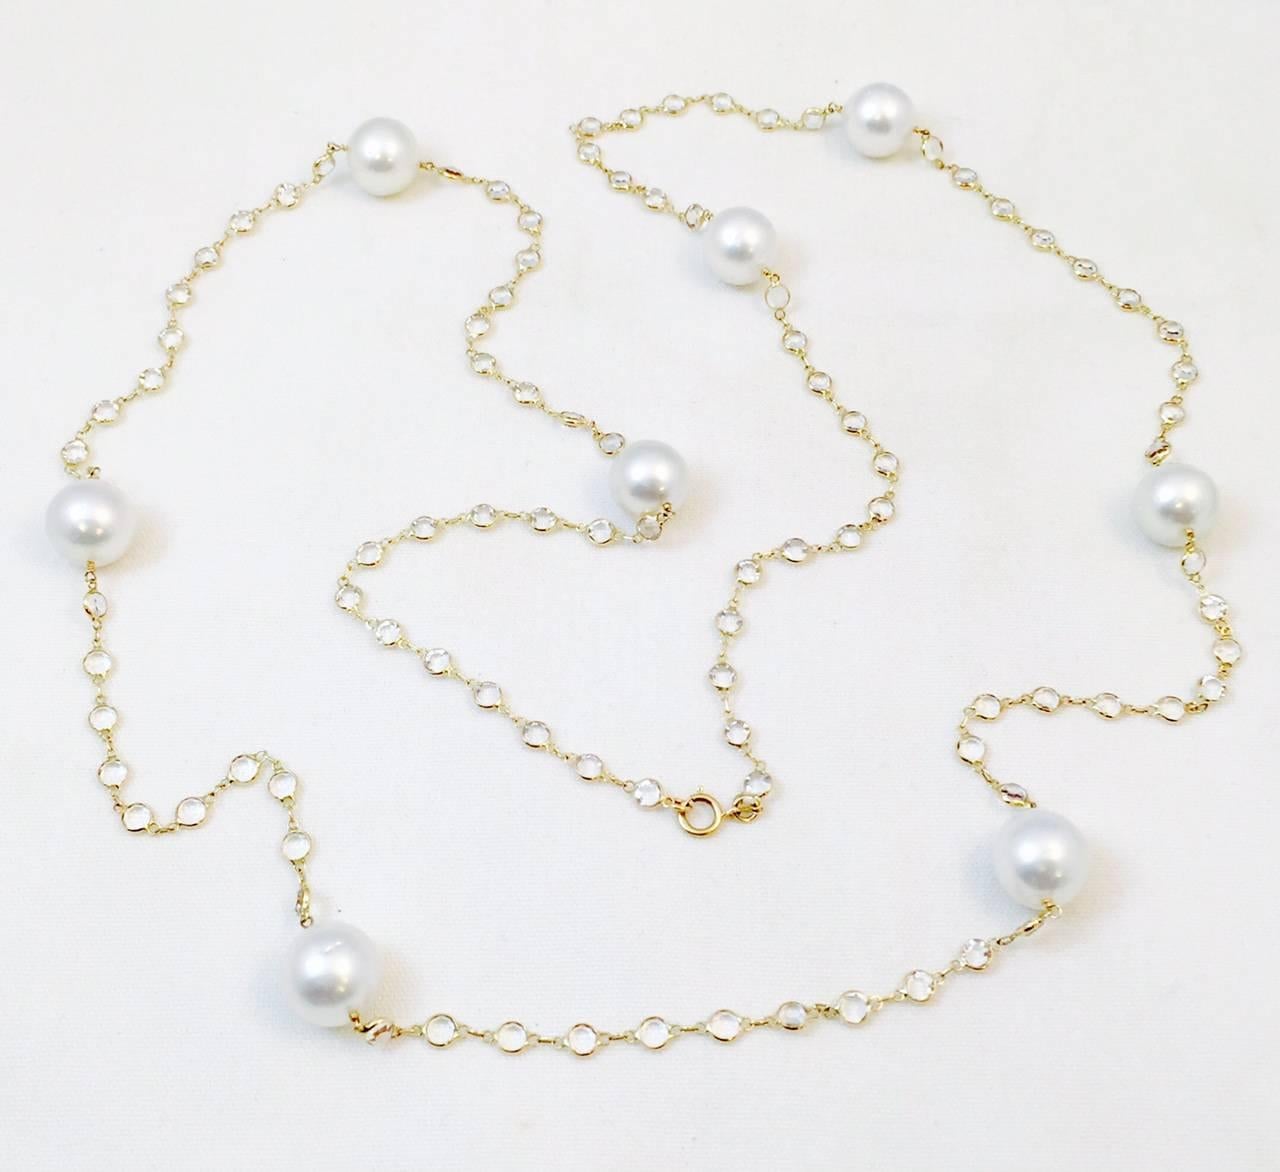 This is the necklace you want!  Thirty-seven inches of WOW!  Eight beautifully matched white cultured South Sea Pearls are the focal point.  Generous 12-13MM each.   The entire 14 karat yellow gold chain contains bezel set, faceted white topaz. 